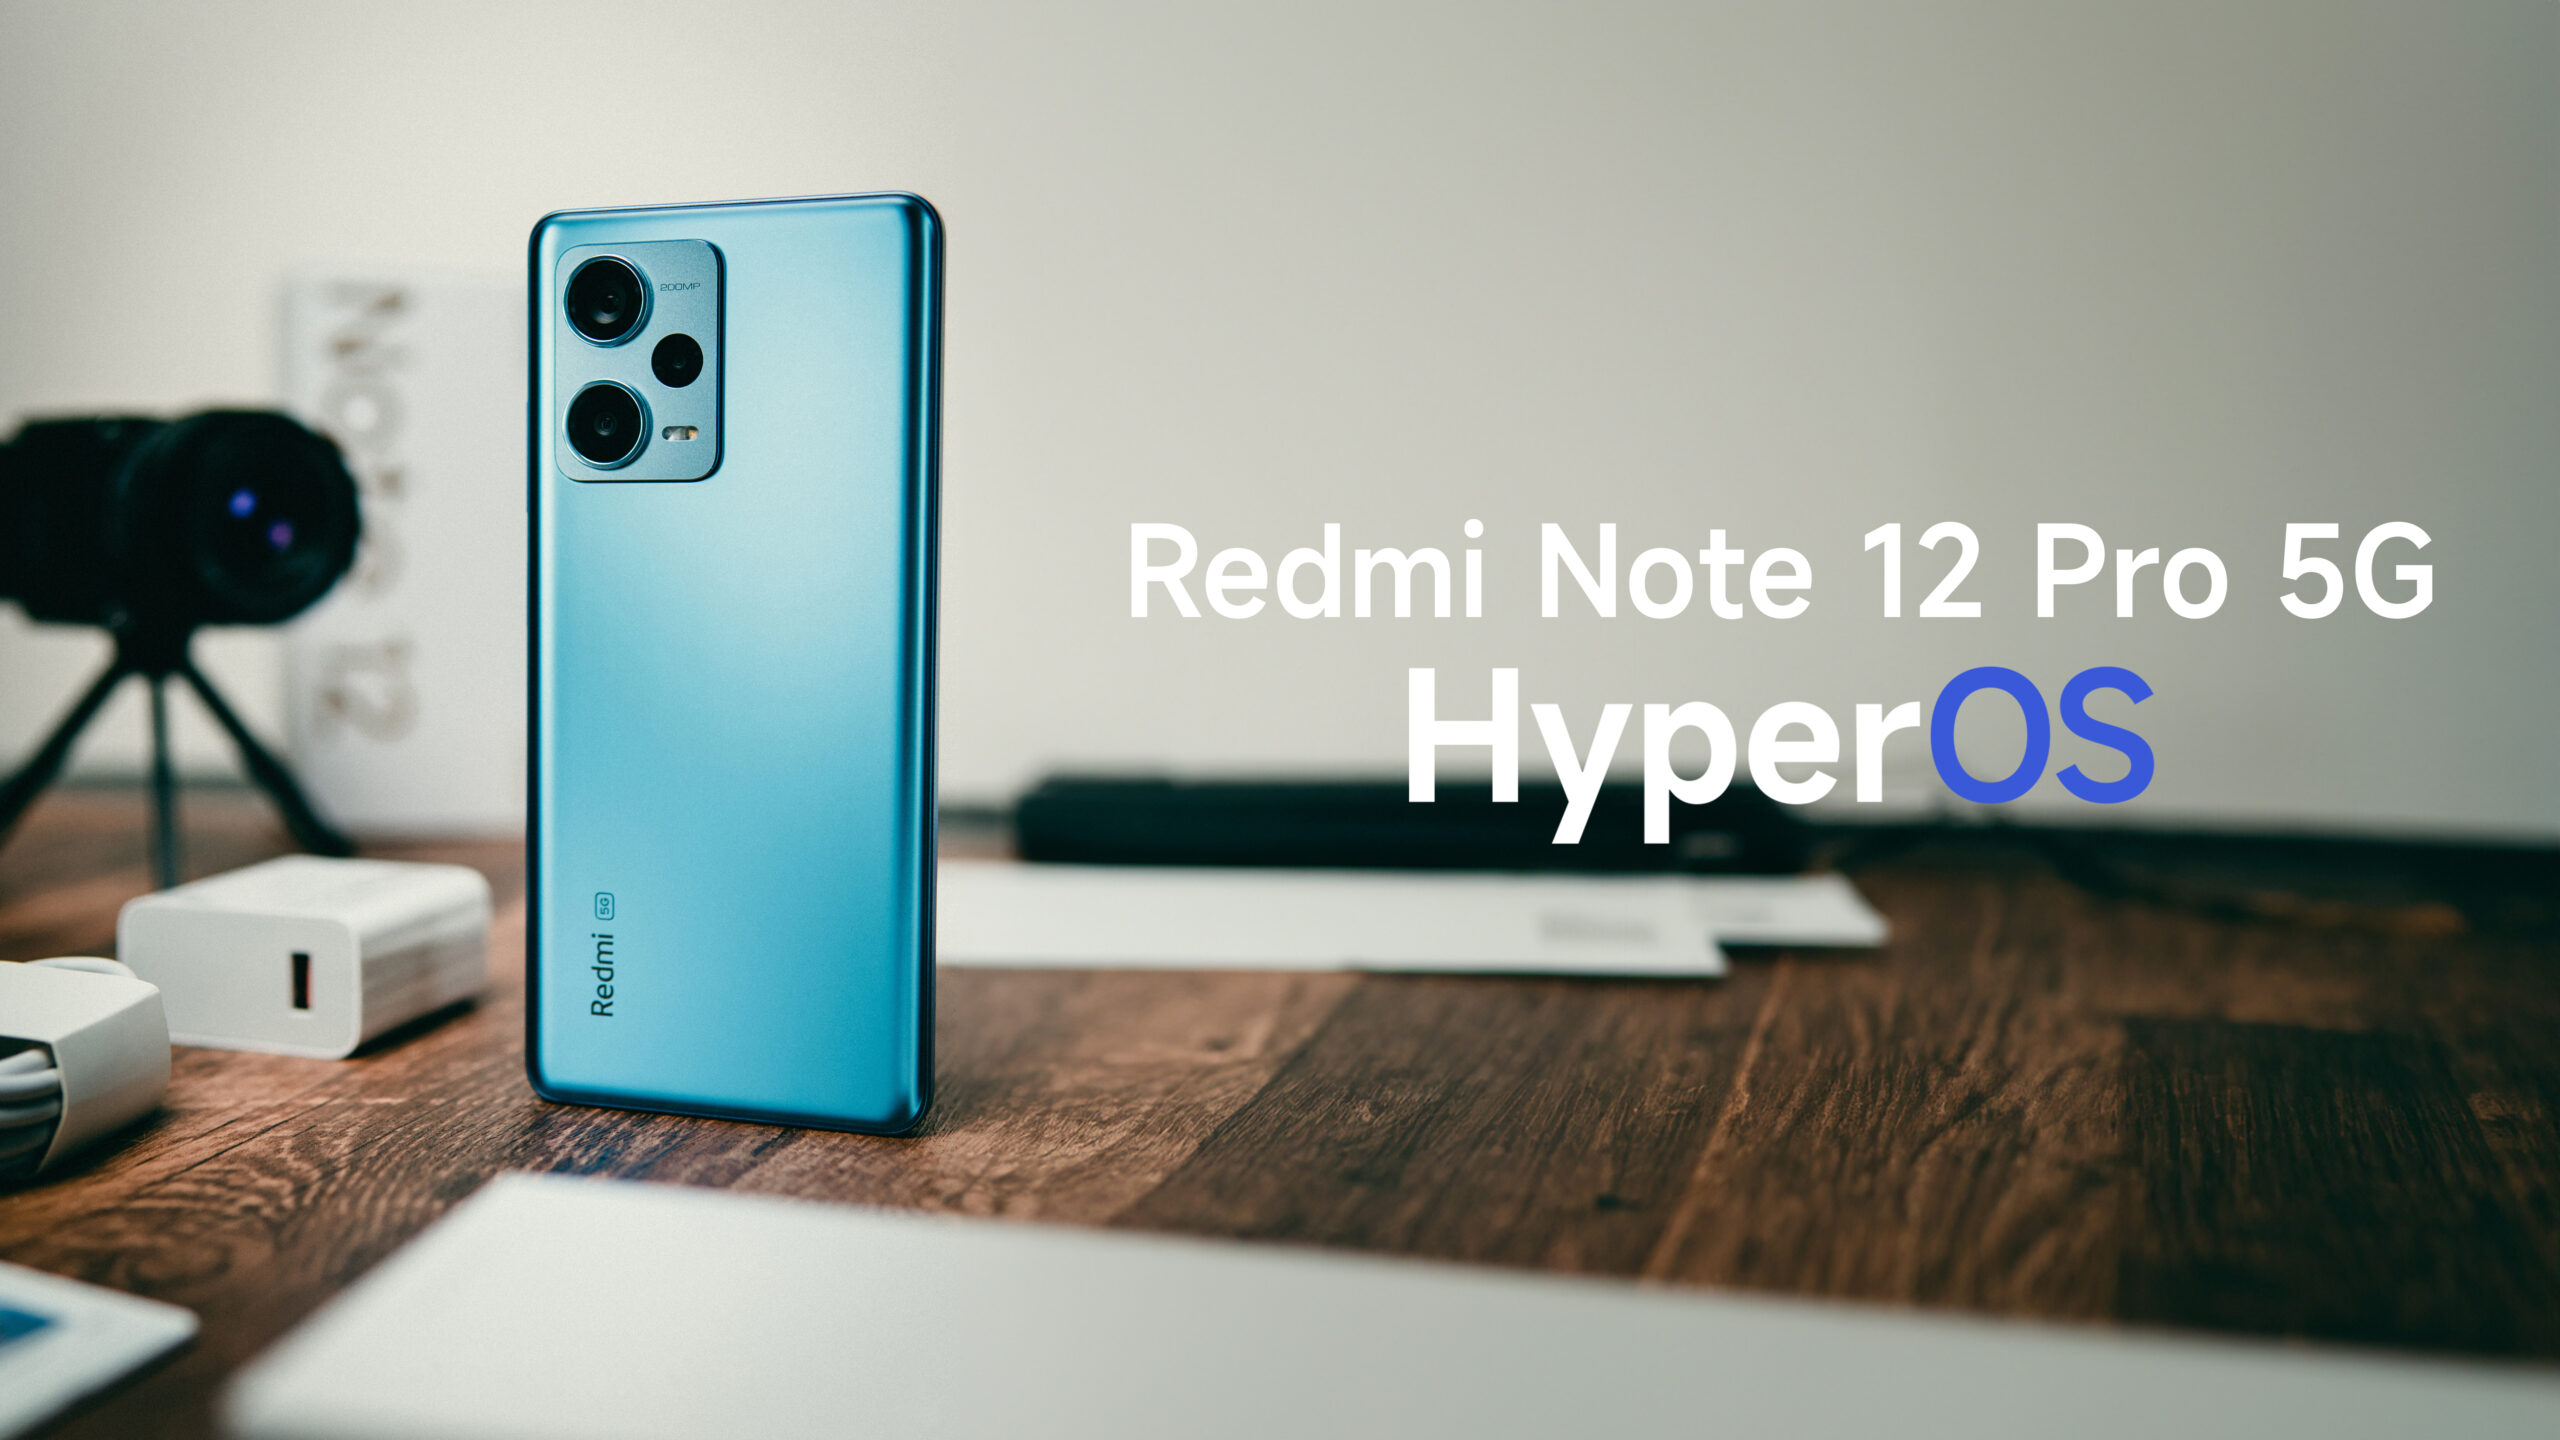 Redmi Note 12 Pro 5G's legendary HyperOS update coming soon - xiaomiui